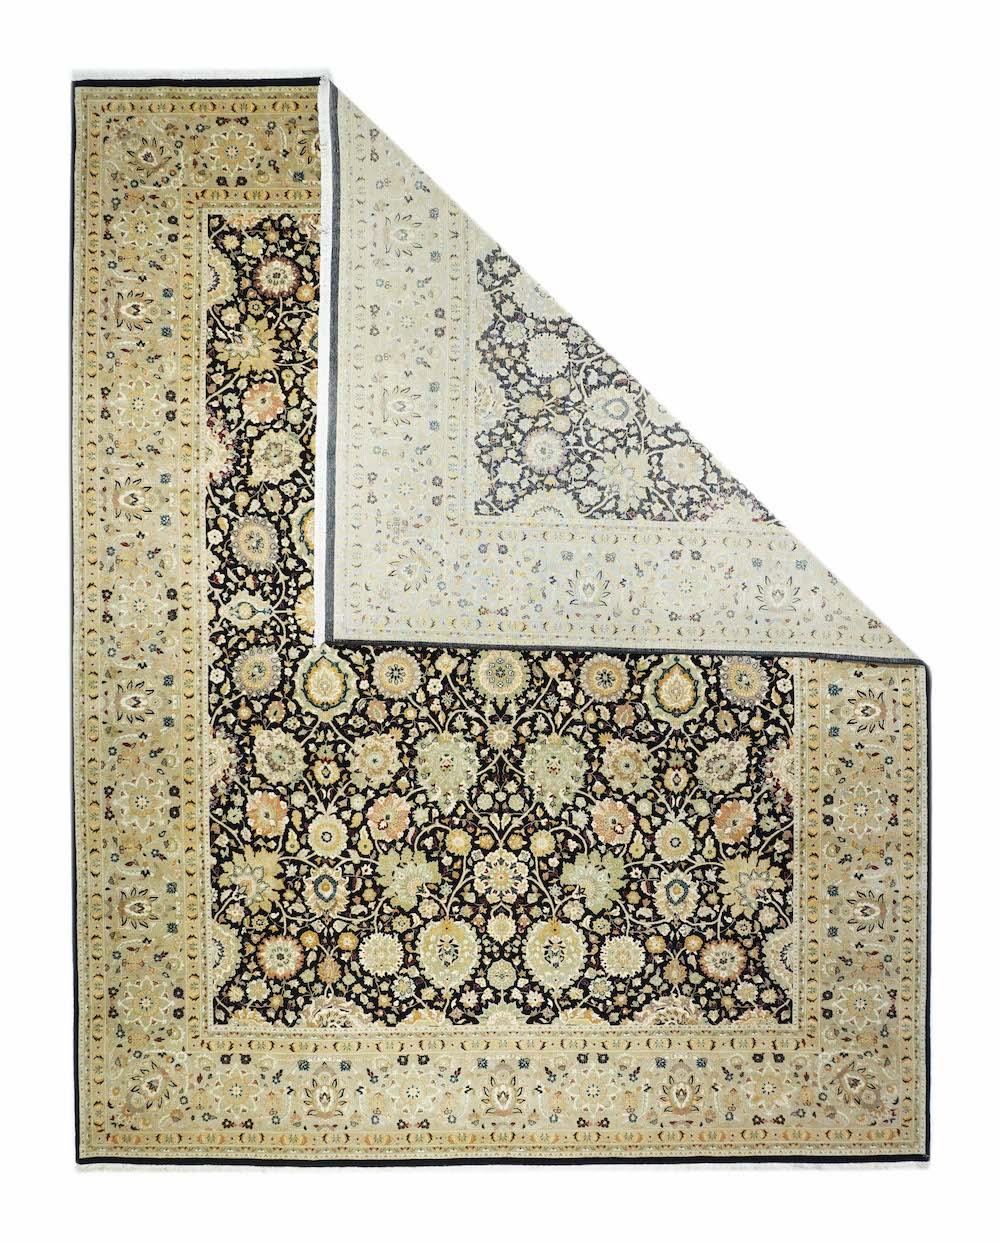 Pakistan rug Tabriz design, hand knotted

Design: Tabriz 

Color: Black border, beige

The art of weaving developed in the region comprising Pakistan at a time when few other civilizations employed it. Excavations at Moenjodaro and Harappa,